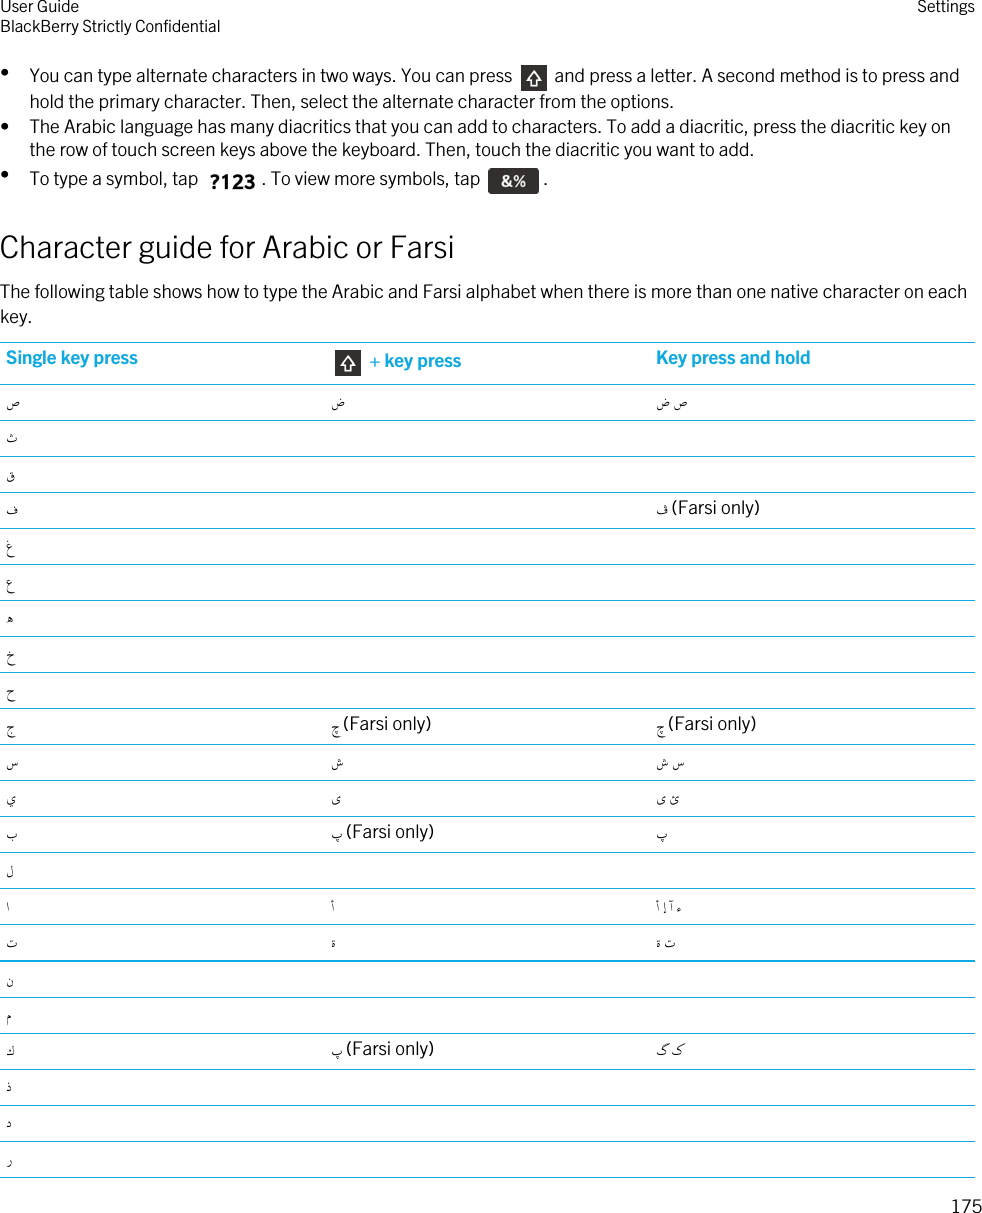 •You can type alternate characters in two ways. You can press   and press a letter. A second method is to press and hold the primary character. Then, select the alternate character from the options.• The Arabic language has many diacritics that you can add to characters. To add a diacritic, press the diacritic key on the row of touch screen keys above the keyboard. Then, touch the diacritic you want to add.•To type a symbol, tap  . To view more symbols, tap  .Character guide for Arabic or FarsiThe following table shows how to type the Arabic and Farsi alphabet when there is more than one native character on each key.Single key press  + key press Key press and holdص ض ص ضثقف ڤ (Farsi only)غعهخحج چ (Farsi only) چ (Farsi only)س ش س شي ى ئ ىب پ (Farsi only) پلاأ ء أ ا أت ة ت ةنمك پ (Farsi only) ک گذدرUser GuideBlackBerry Strictly Confidential Settings175